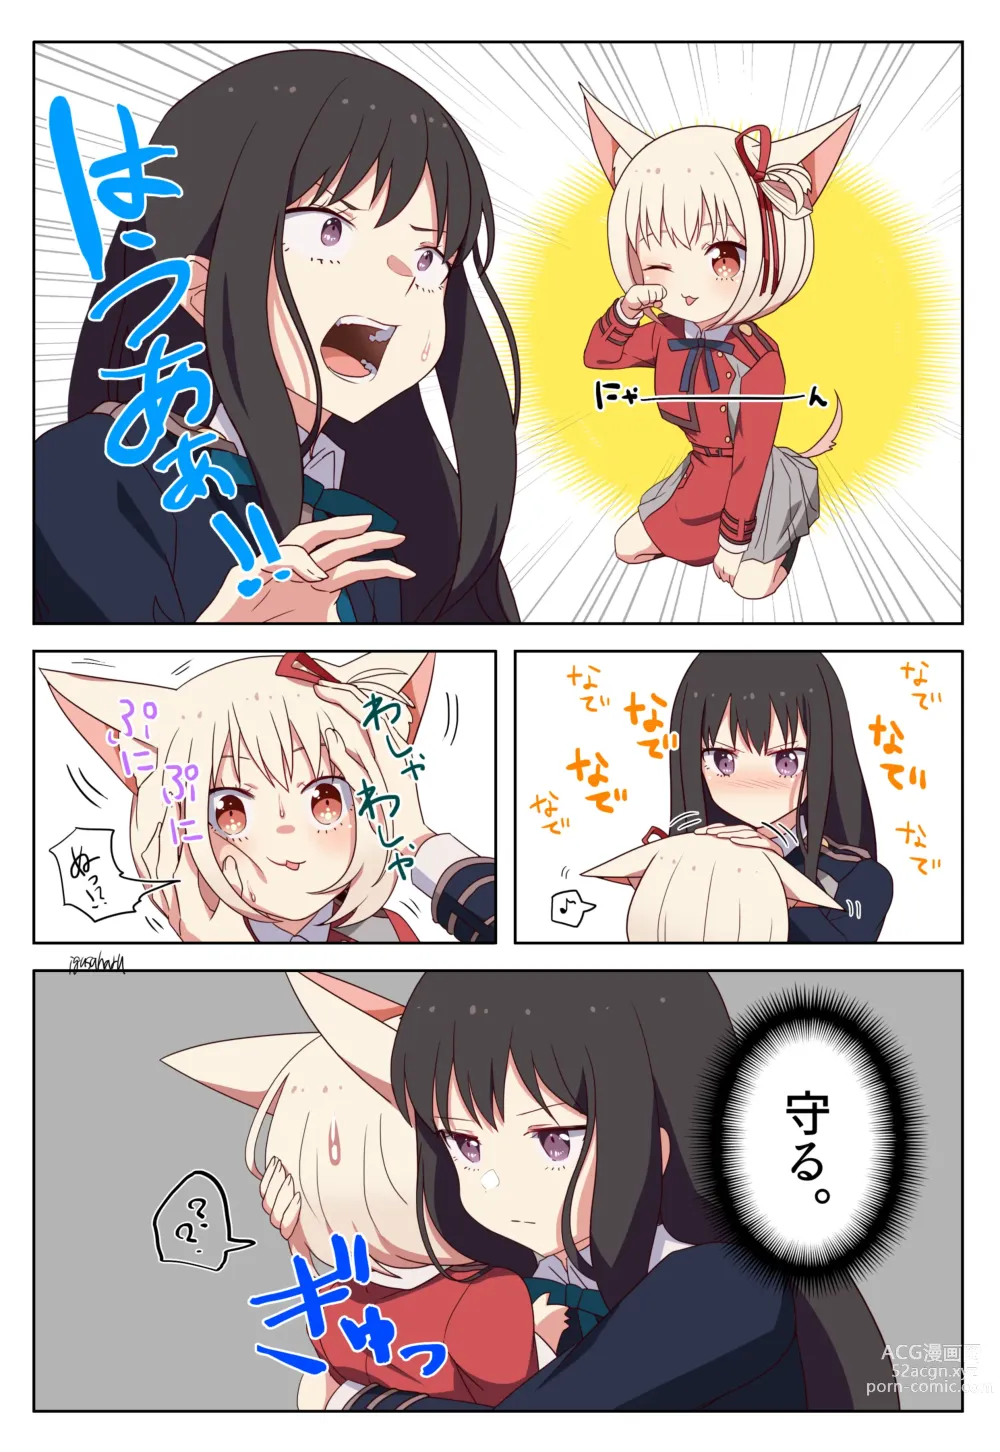 Page 4 of imageset ●PIXIV● 藺草ハル